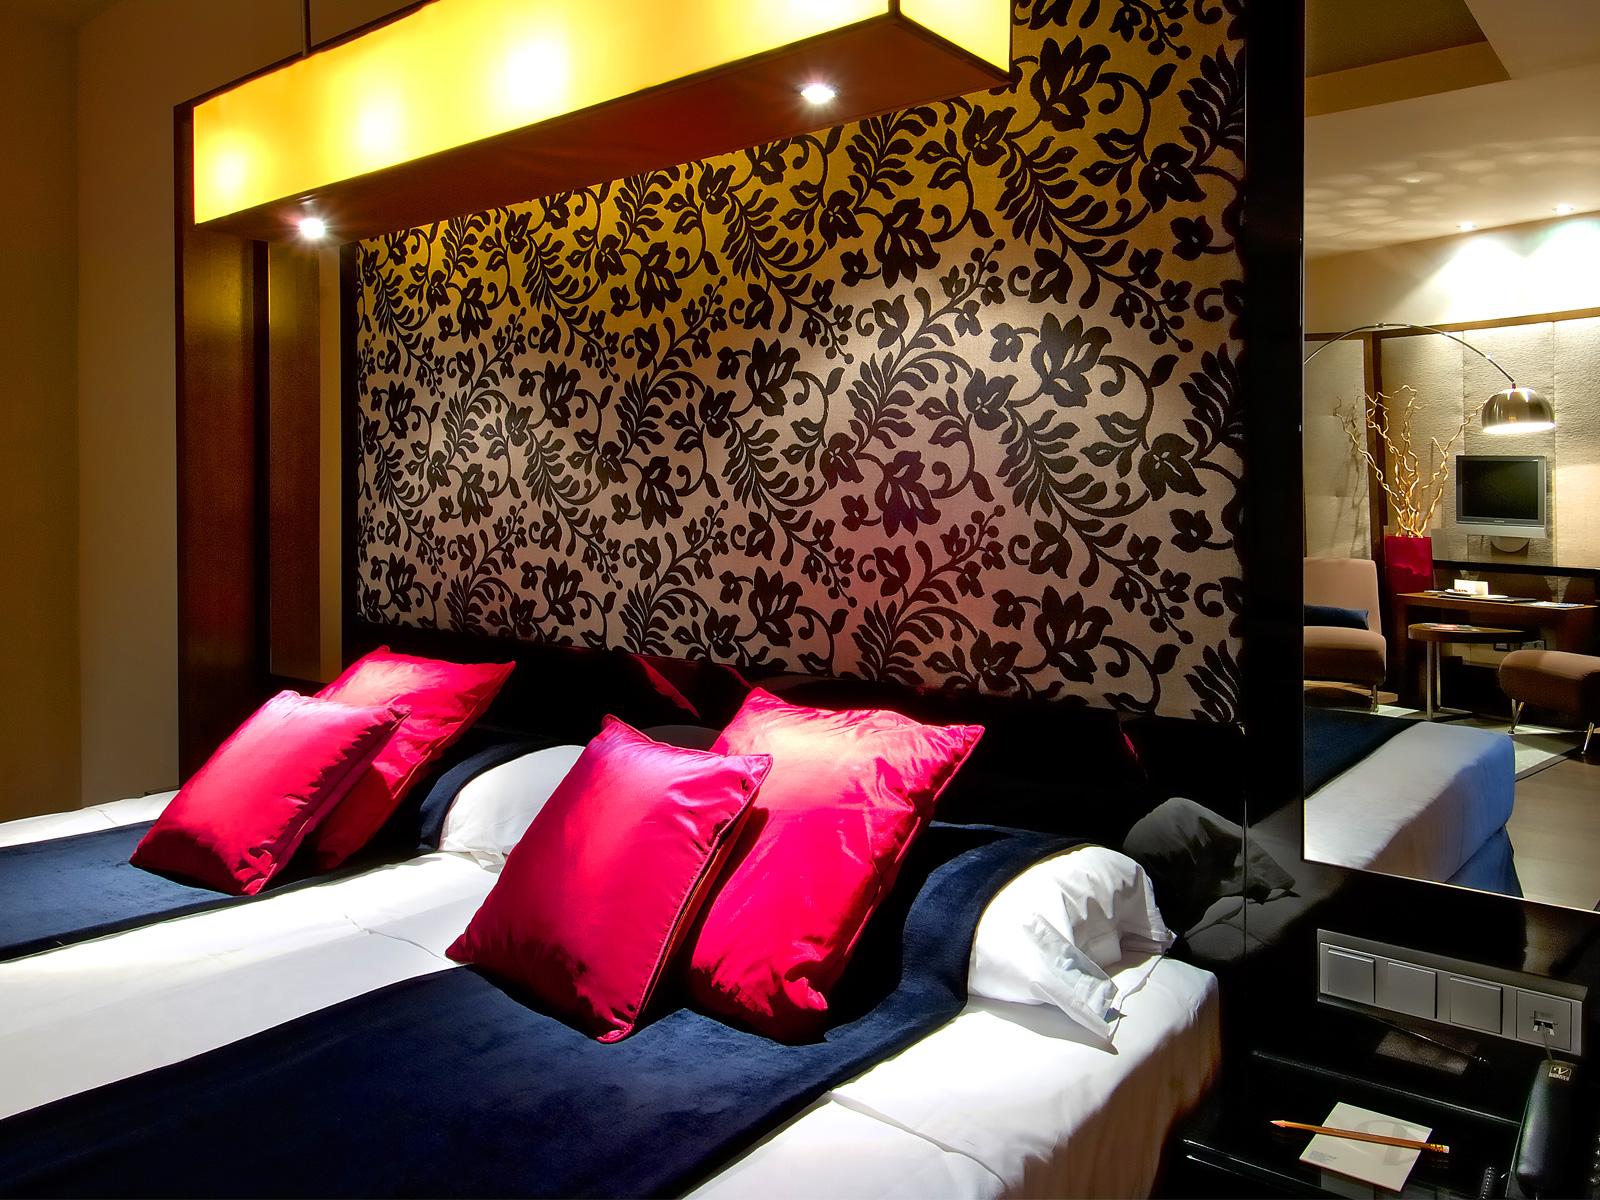 Promotions Hotel Madrid Soho - Vincci Hotels - Two Nights Special